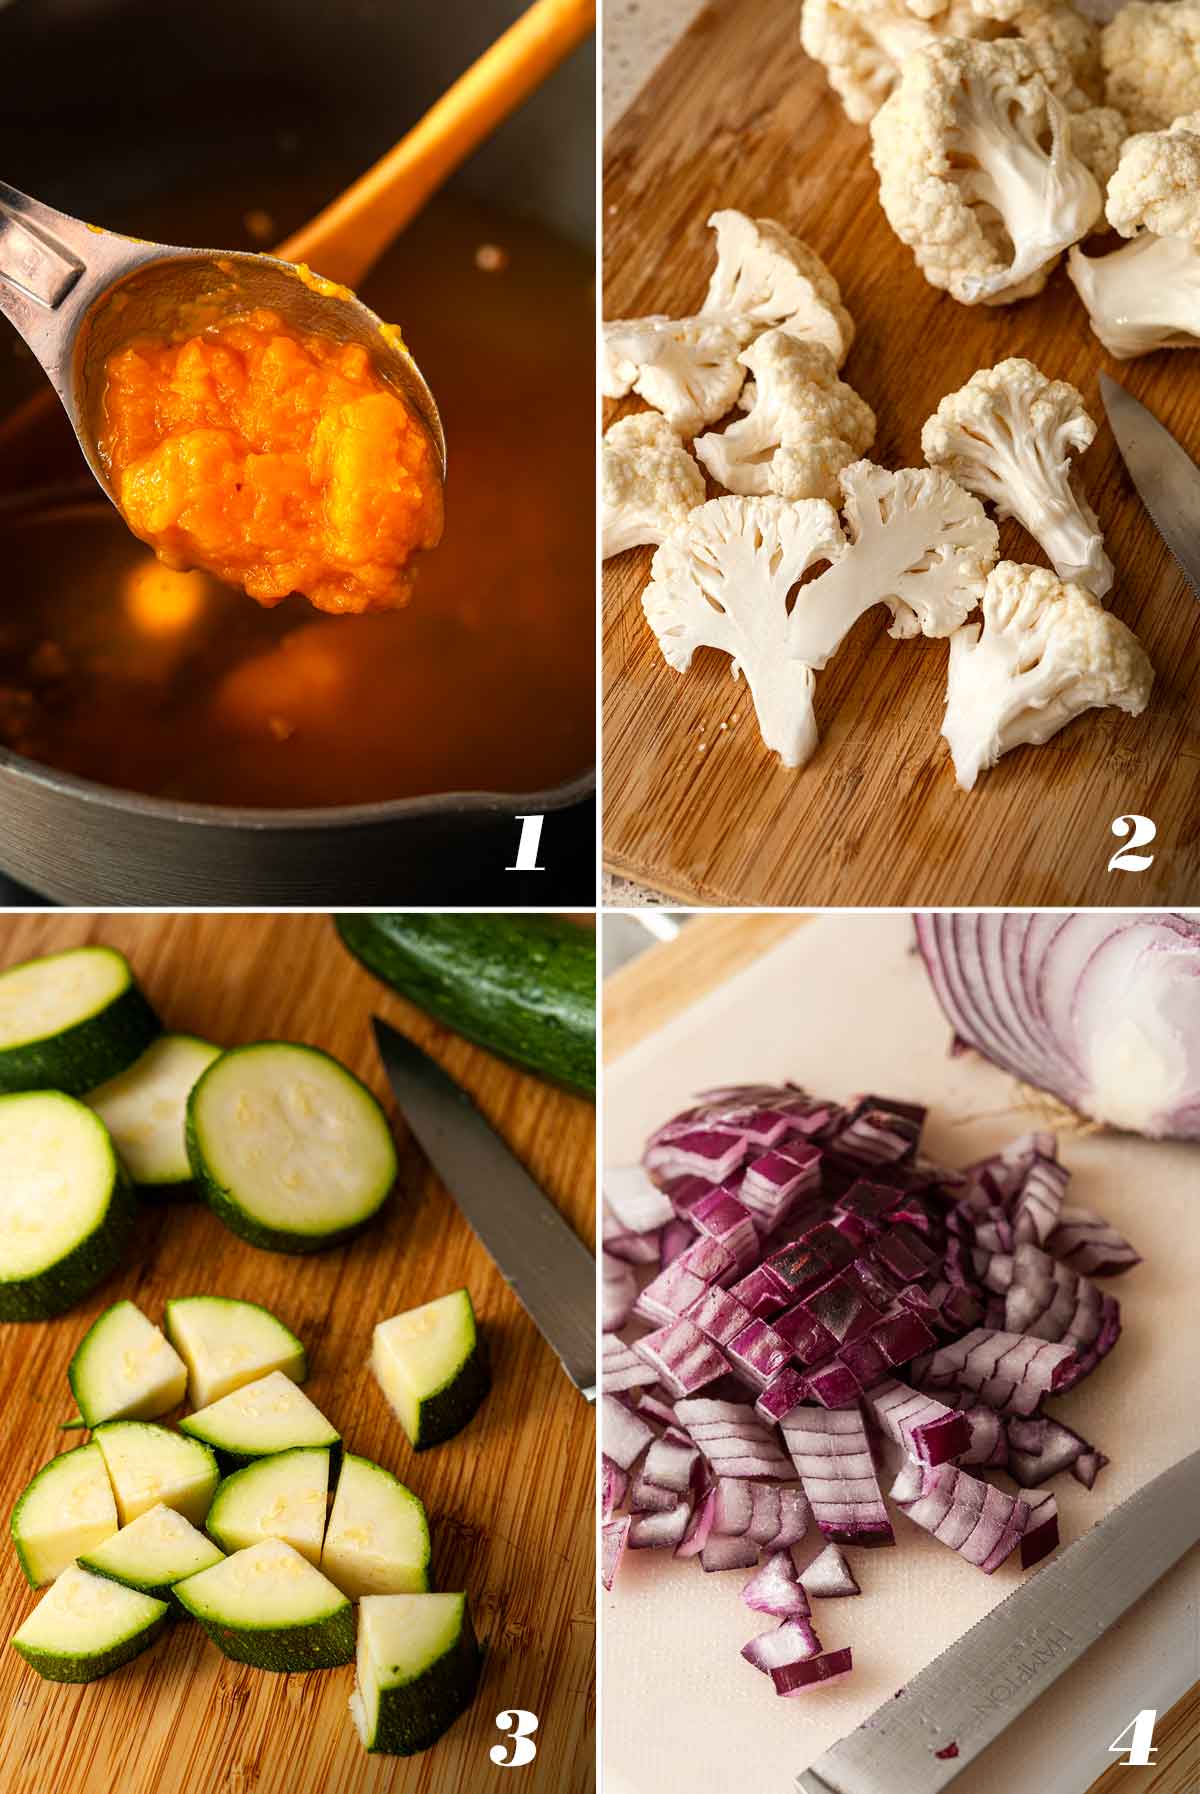 A collage of 4 numbered images showing how to prep vegetables and rice.